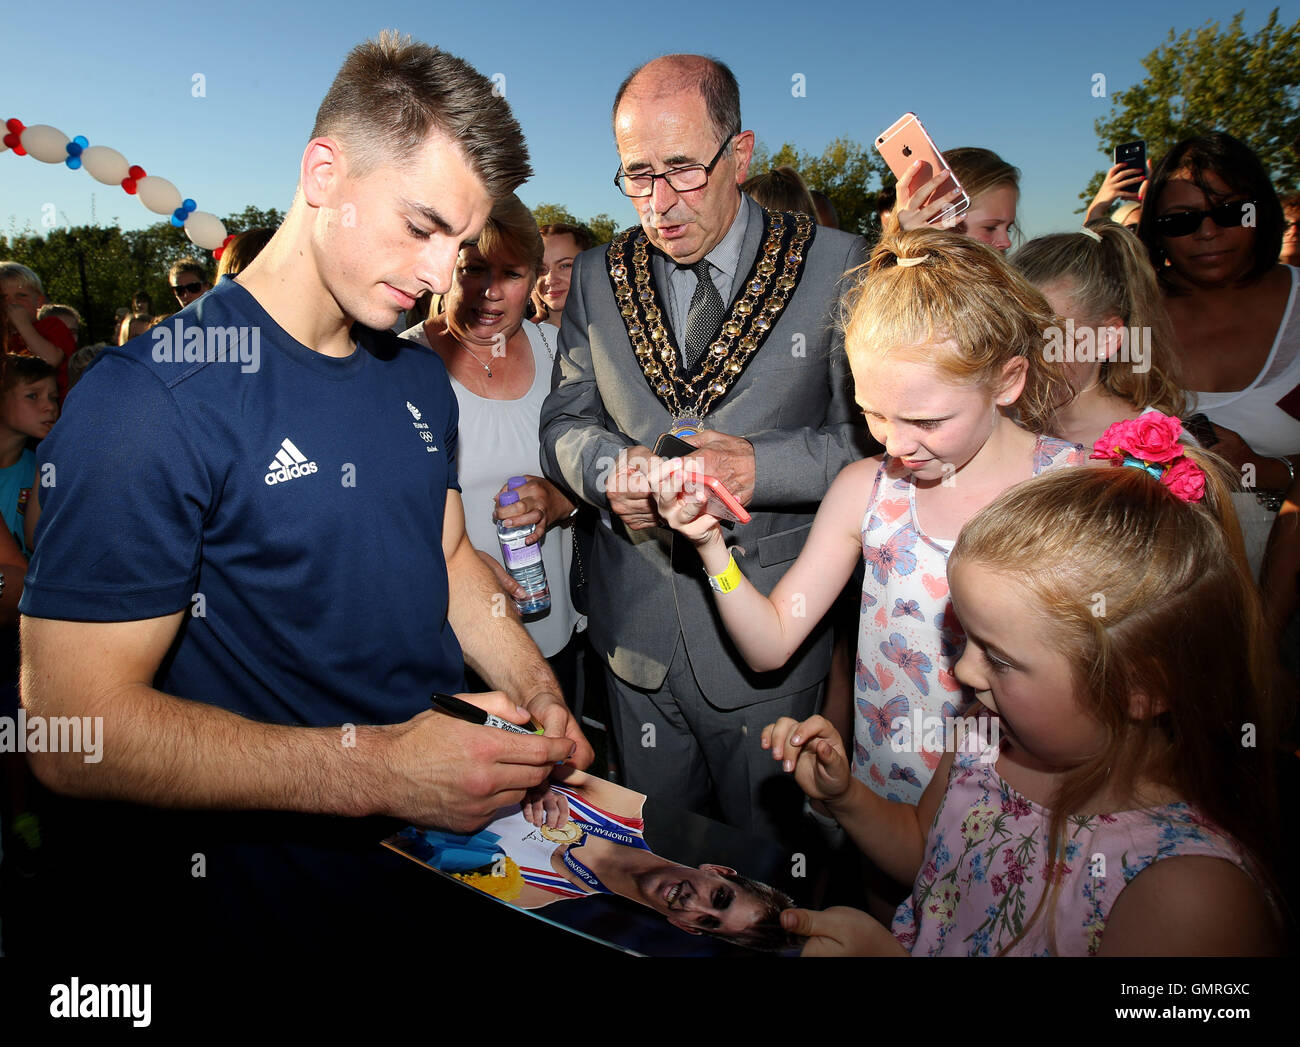 Team GB double Olympic Champion Max Whitlock signs autographs with local children during a homecoming event at South Essex Gymnastics Club, Basildon. Stock Photo